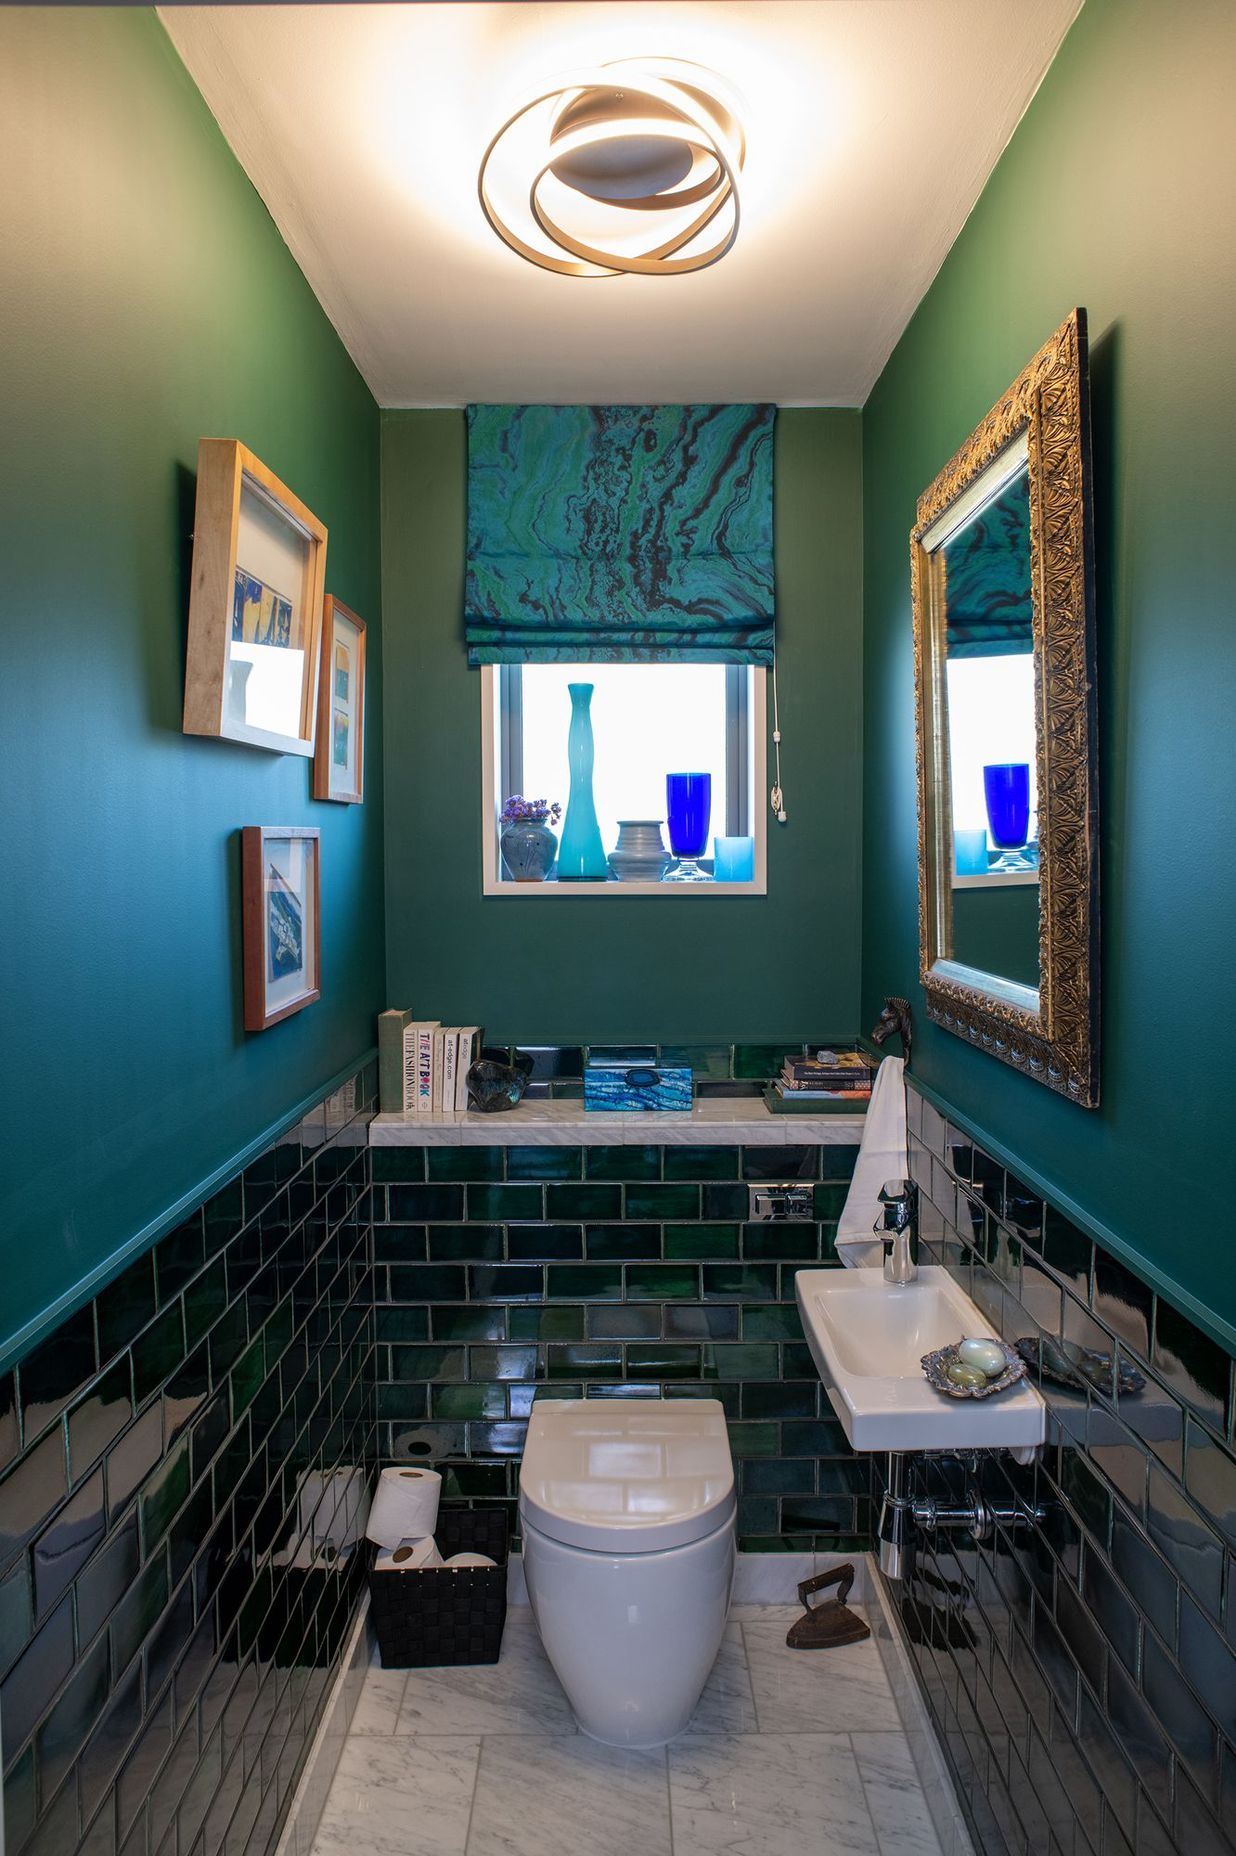 Finished powder-room 'The Green Room' as named by the client